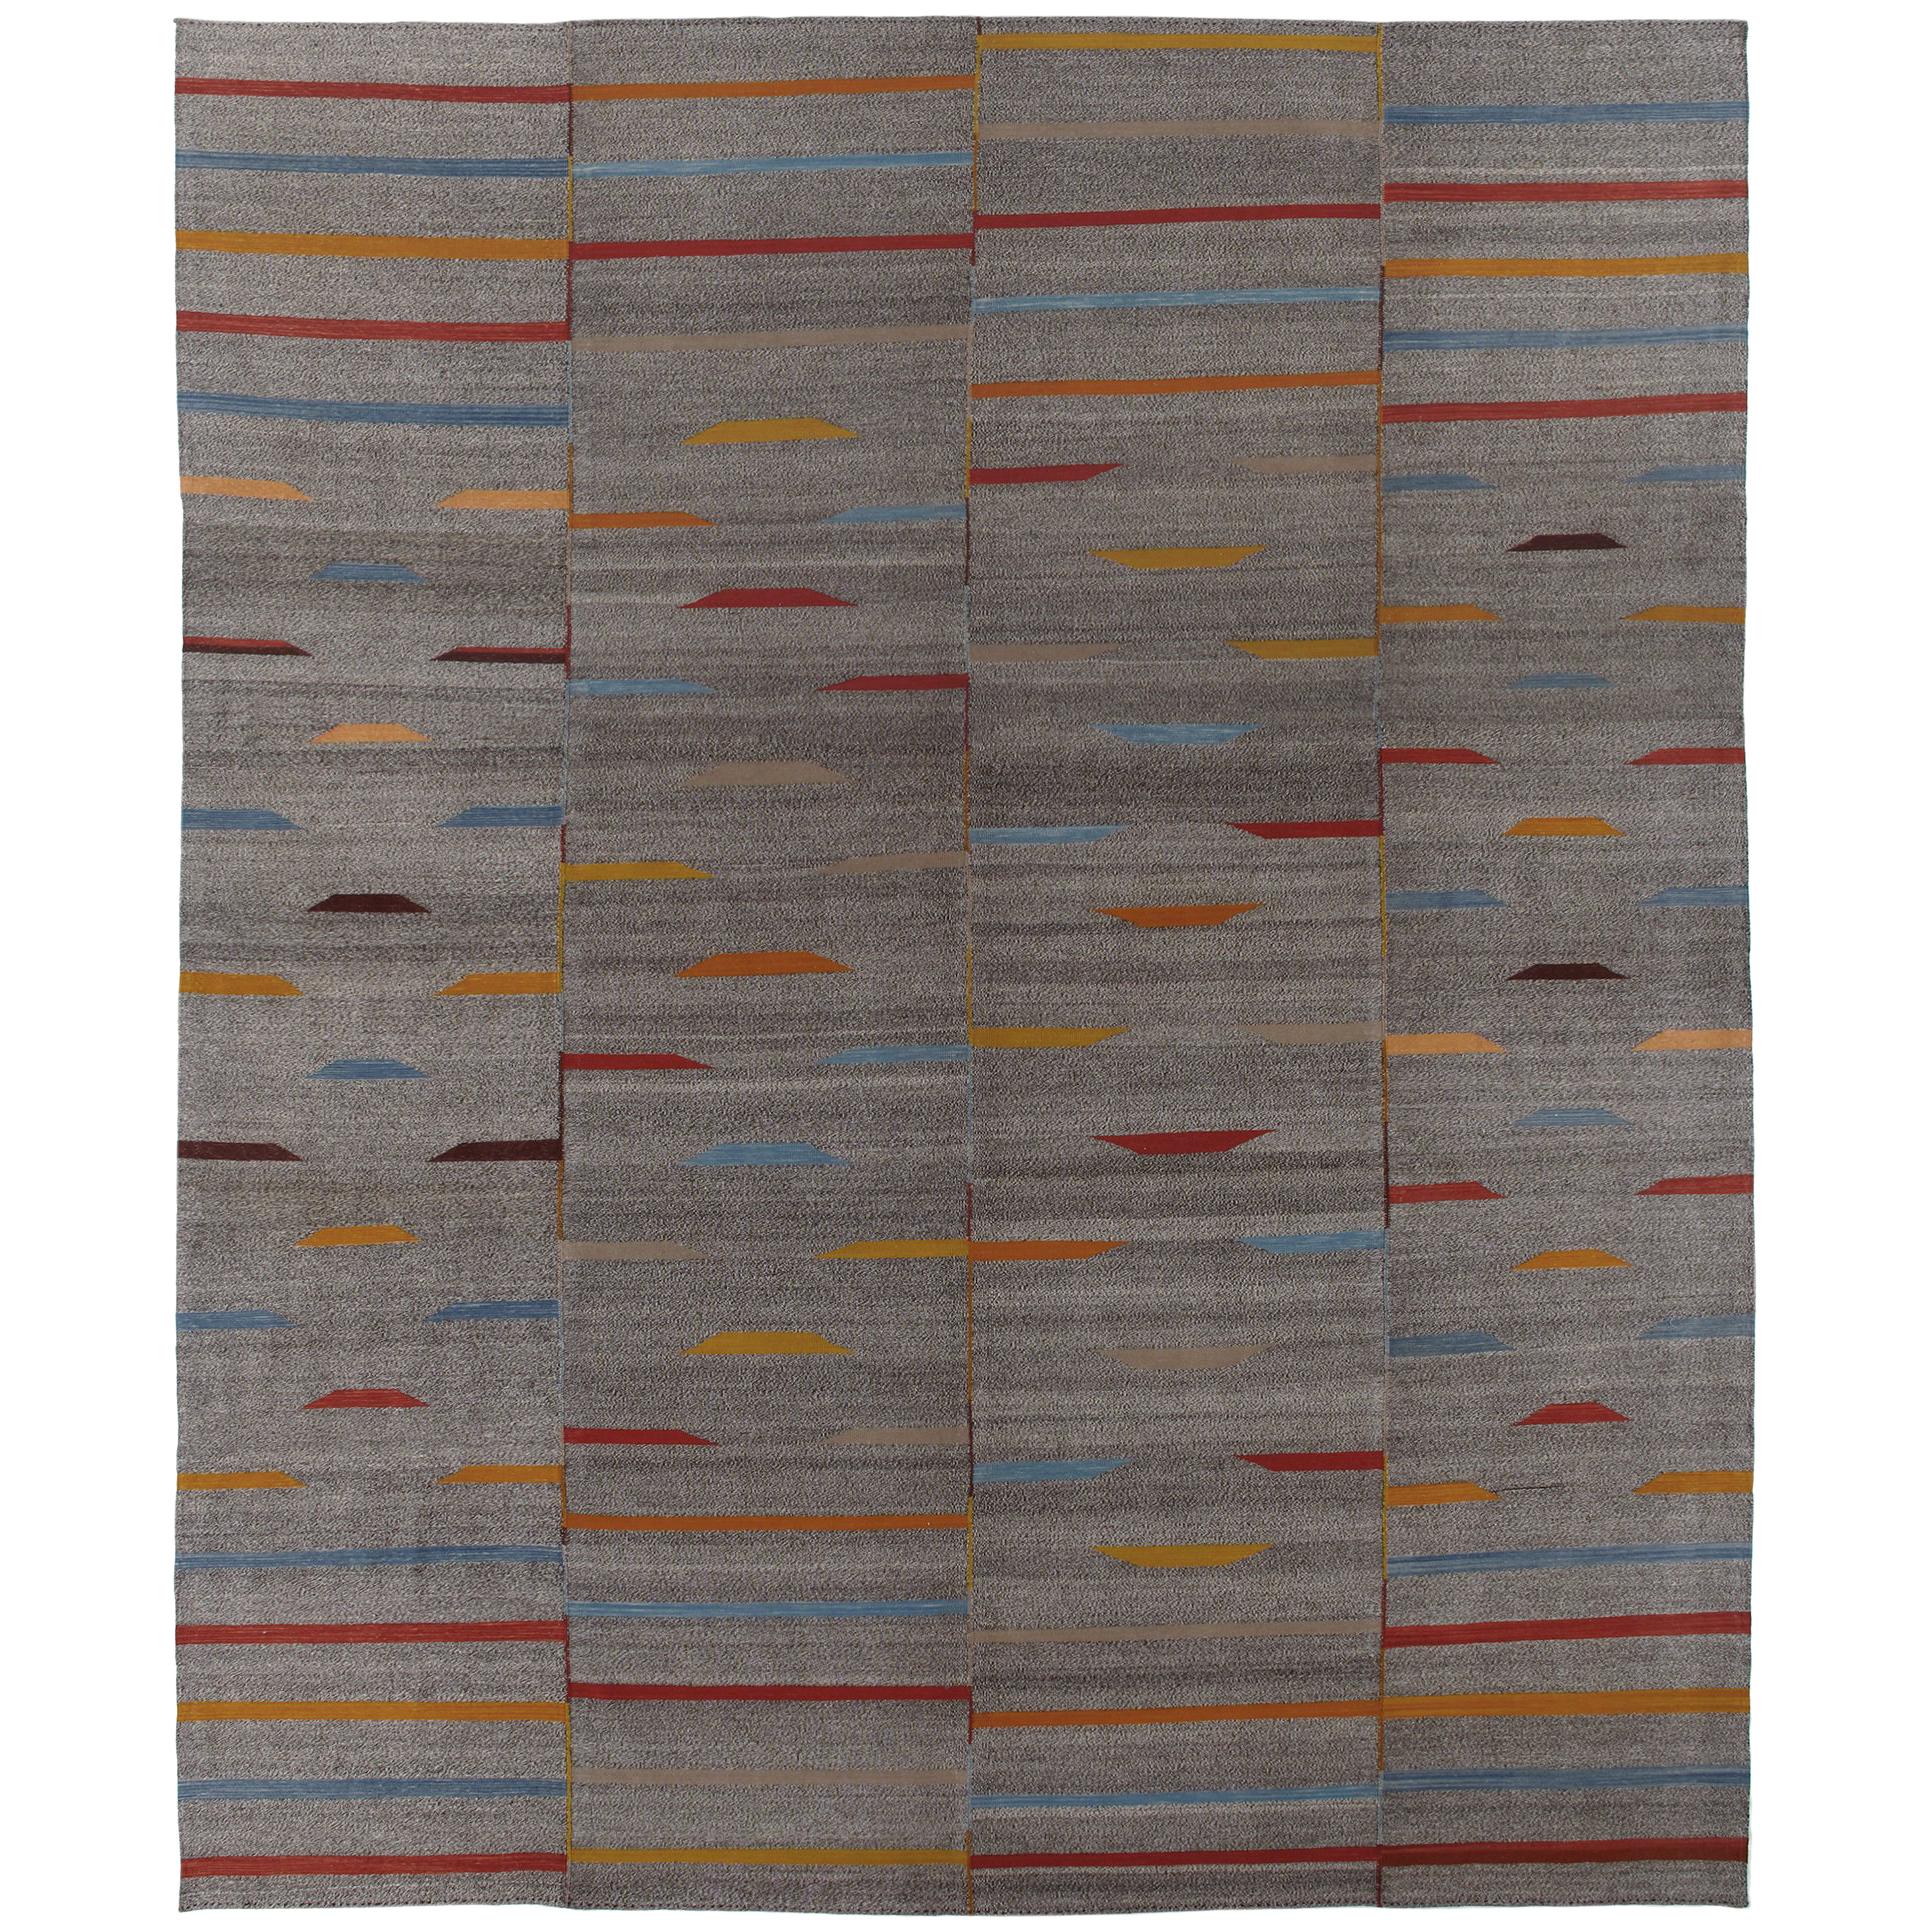 Our Mazandaran collection highlights the Minimalist sophistication that existed long before the modern era. The collection was inspired by the kilims that were originally woven by Persian women in the Mazandaran Province in northwest of Iran near